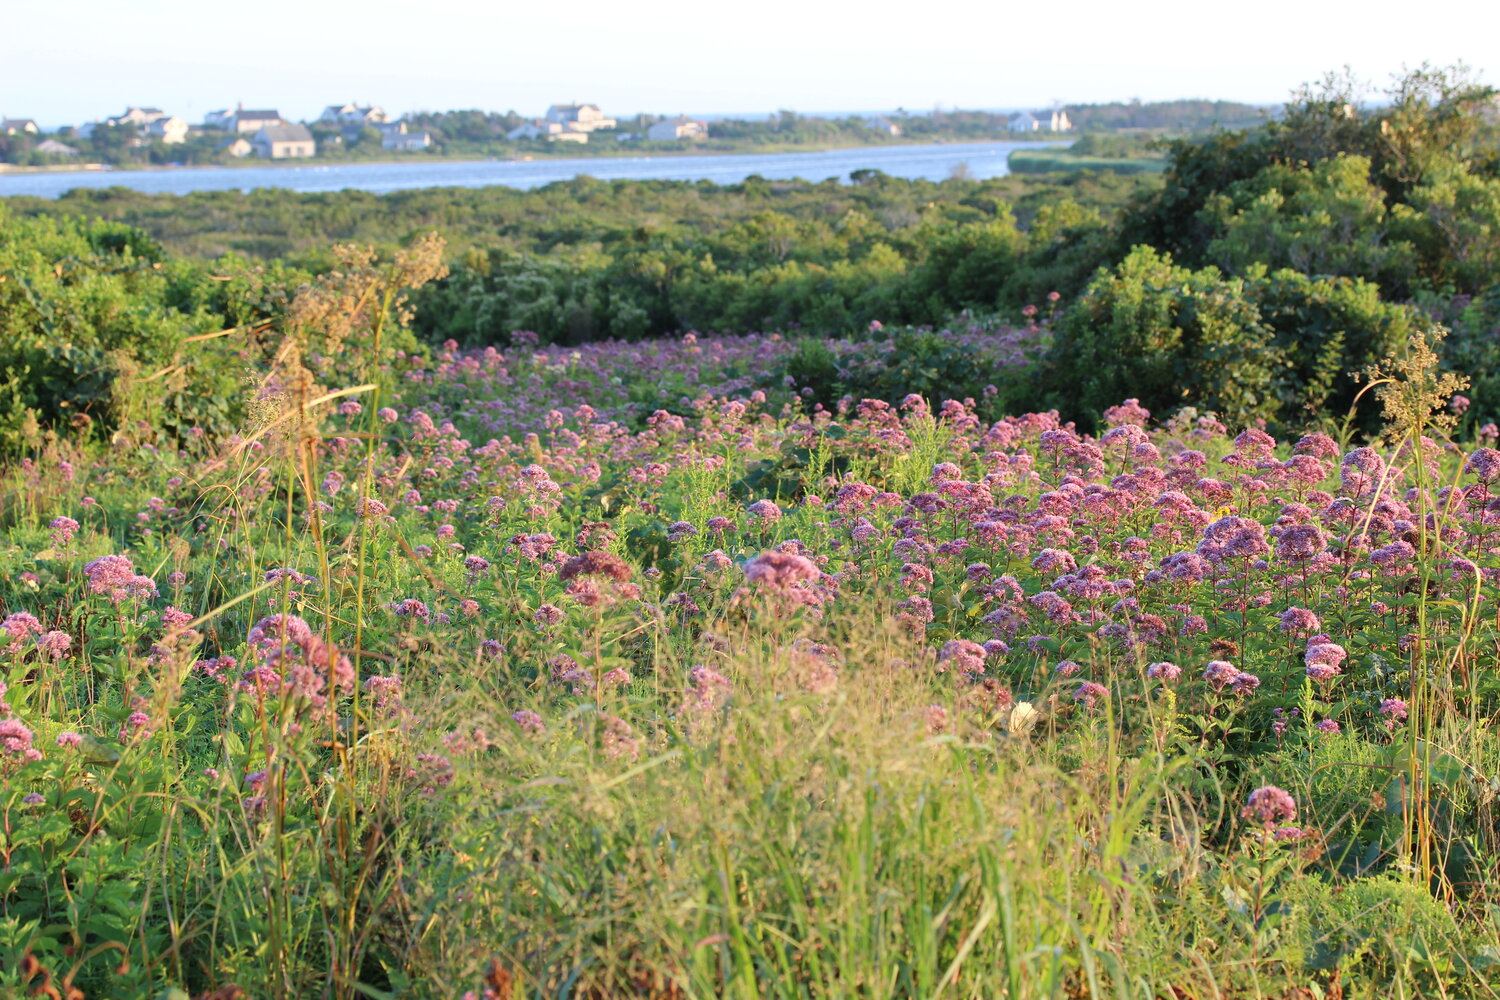 A field of Joe Pye weed overlooks Hummock Pond and Ram Pasture at the Nantucket Conservation Foundation’s Sanford Farm property.